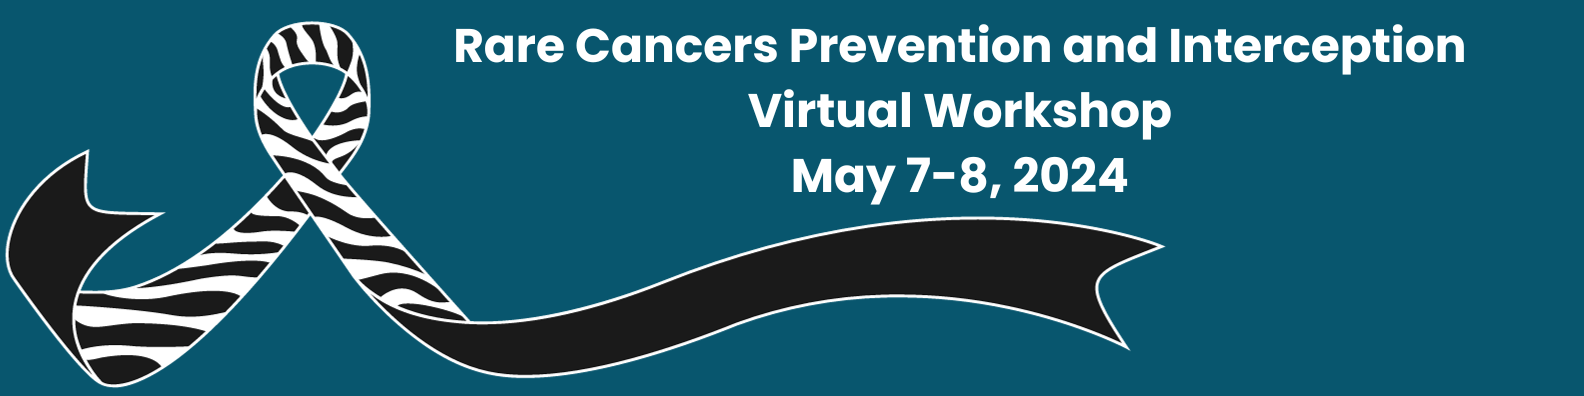 Rare Cancers Prevention and Interception Workshop